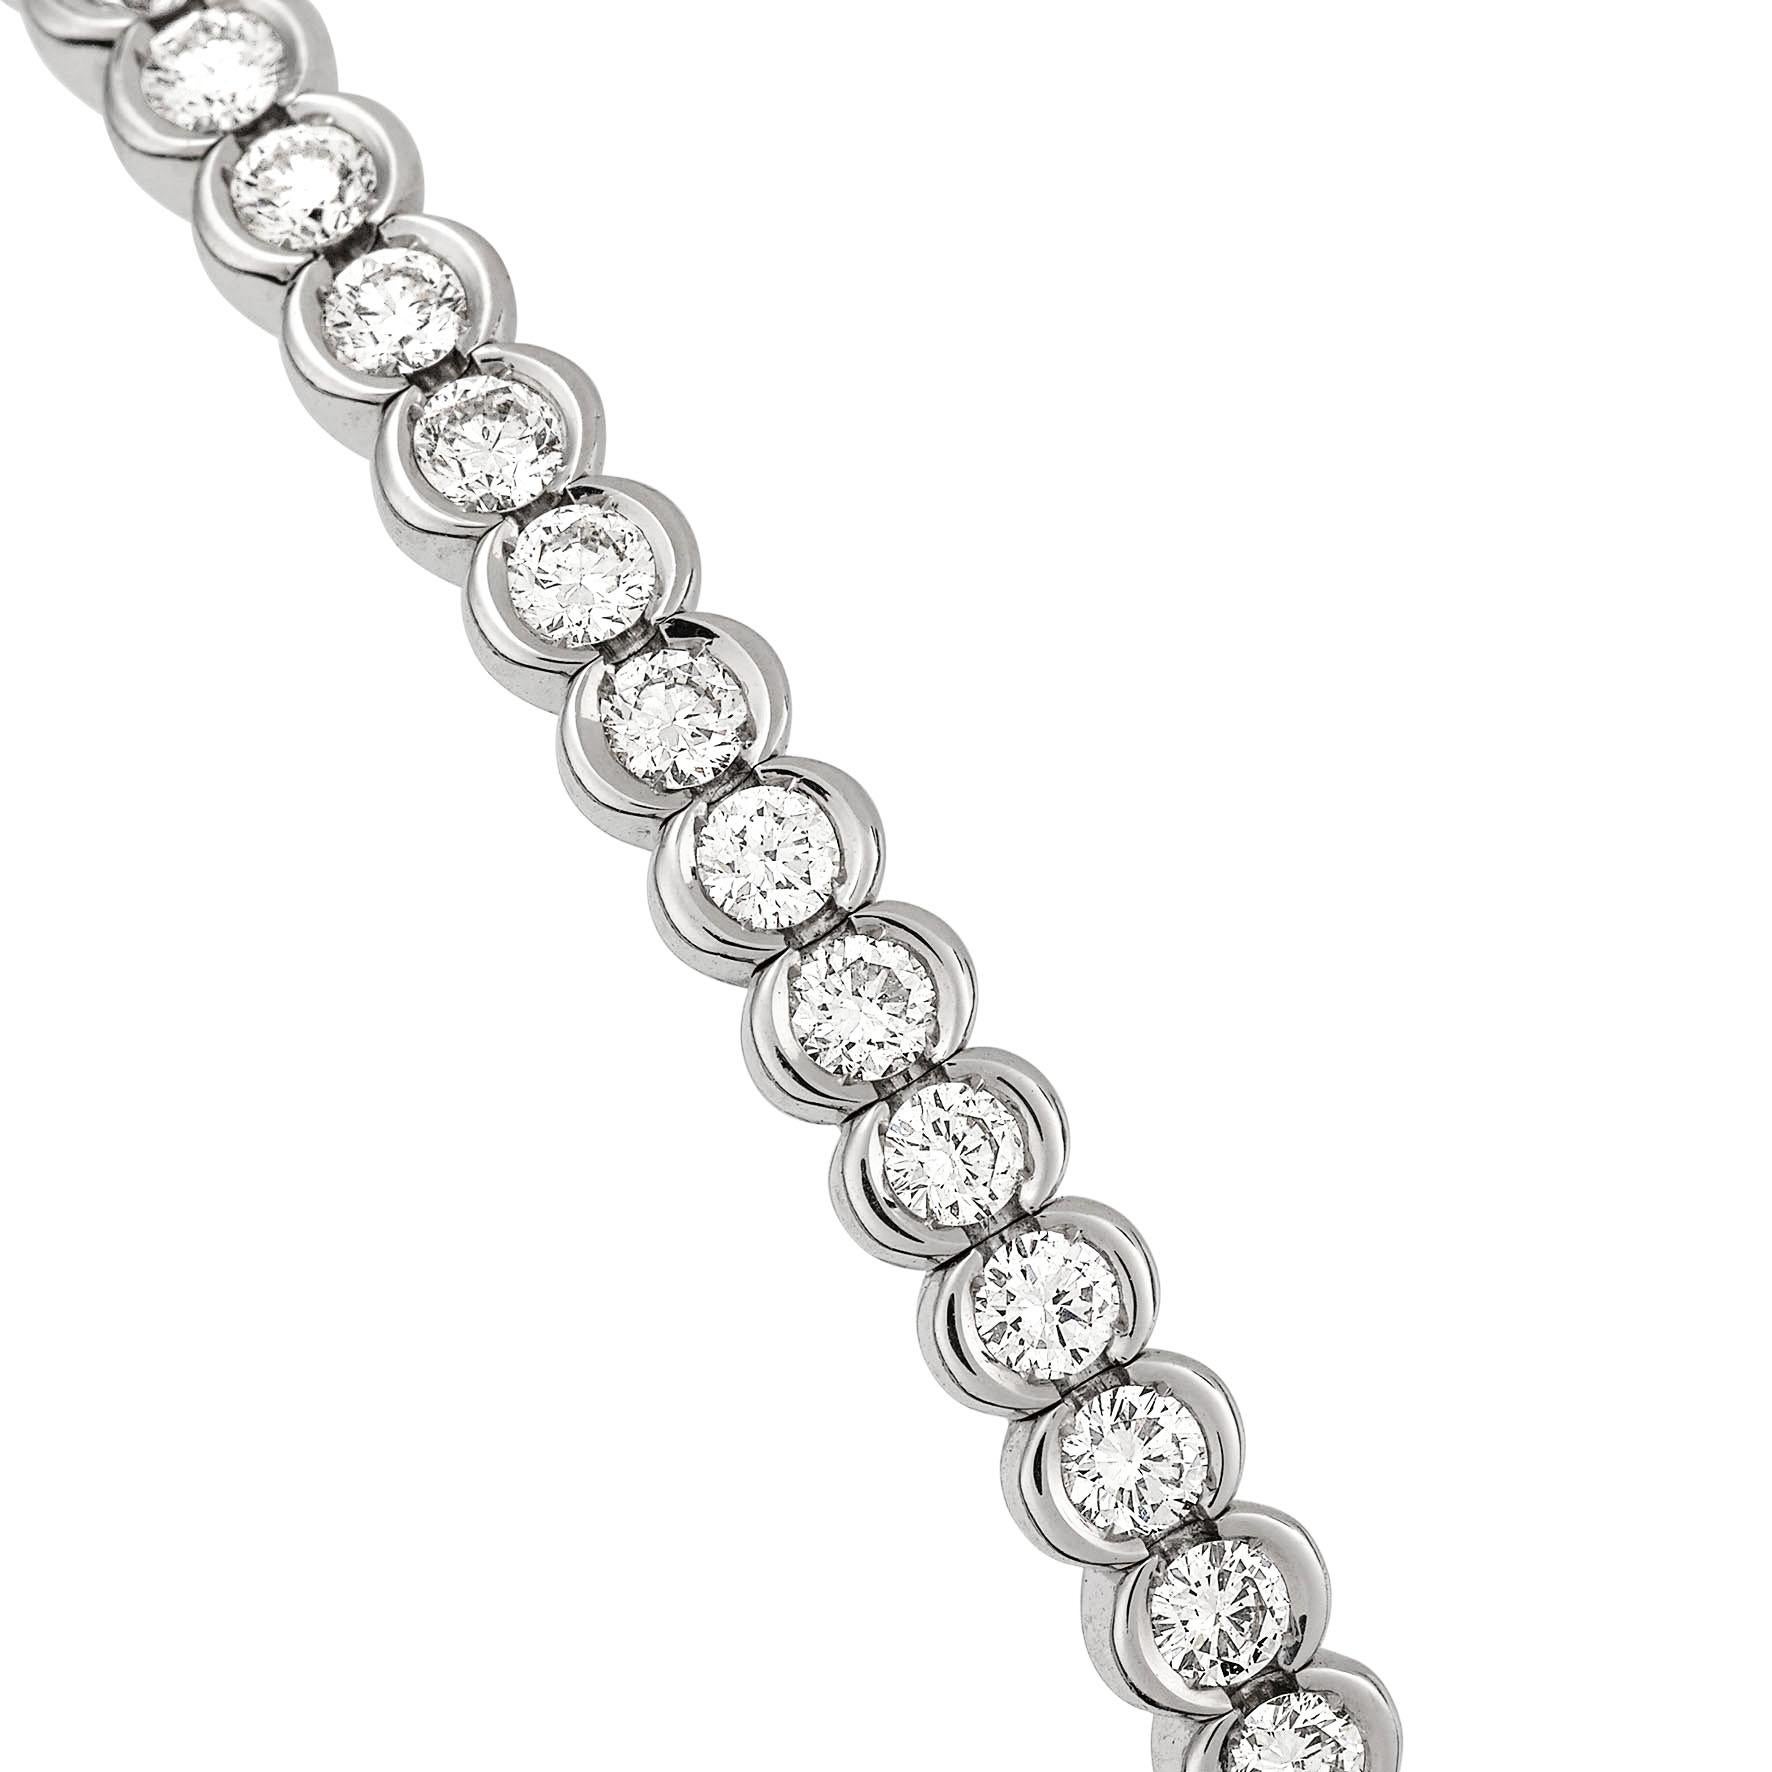 Giulians contemporary 18k white gold and diamond bangle.  This bangle features 31 semi-bezel set round brilliant cut white diamonds with a total weight of 1.30ct (G VS).  The internal measurements of the oval bangle is 57.75 mm (2.27 inches) wide